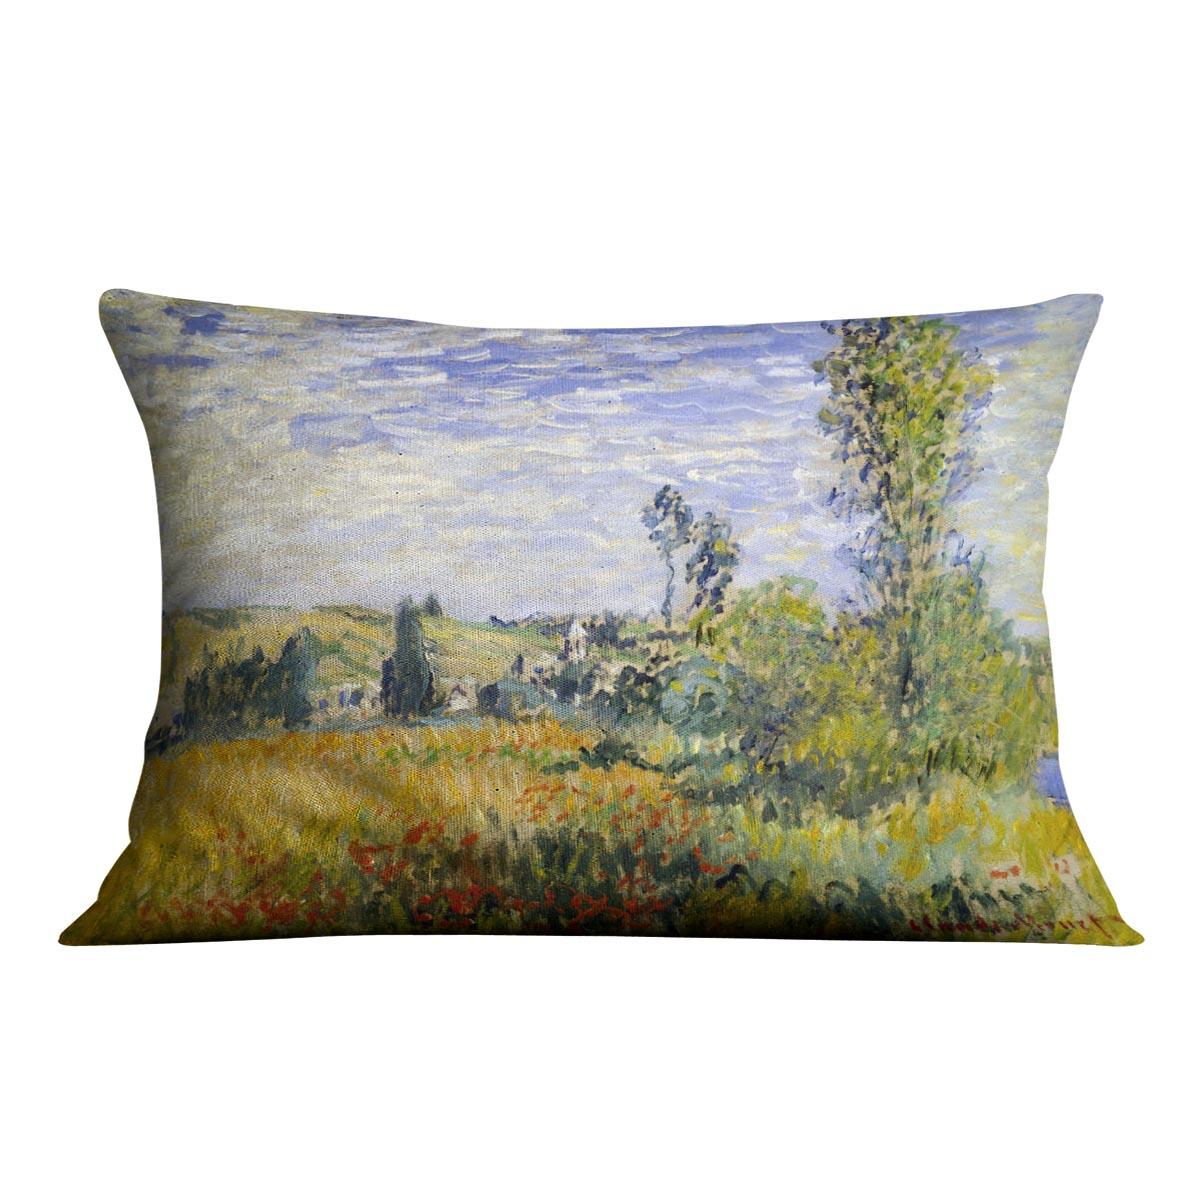 Vetheuil by Monet Cushion